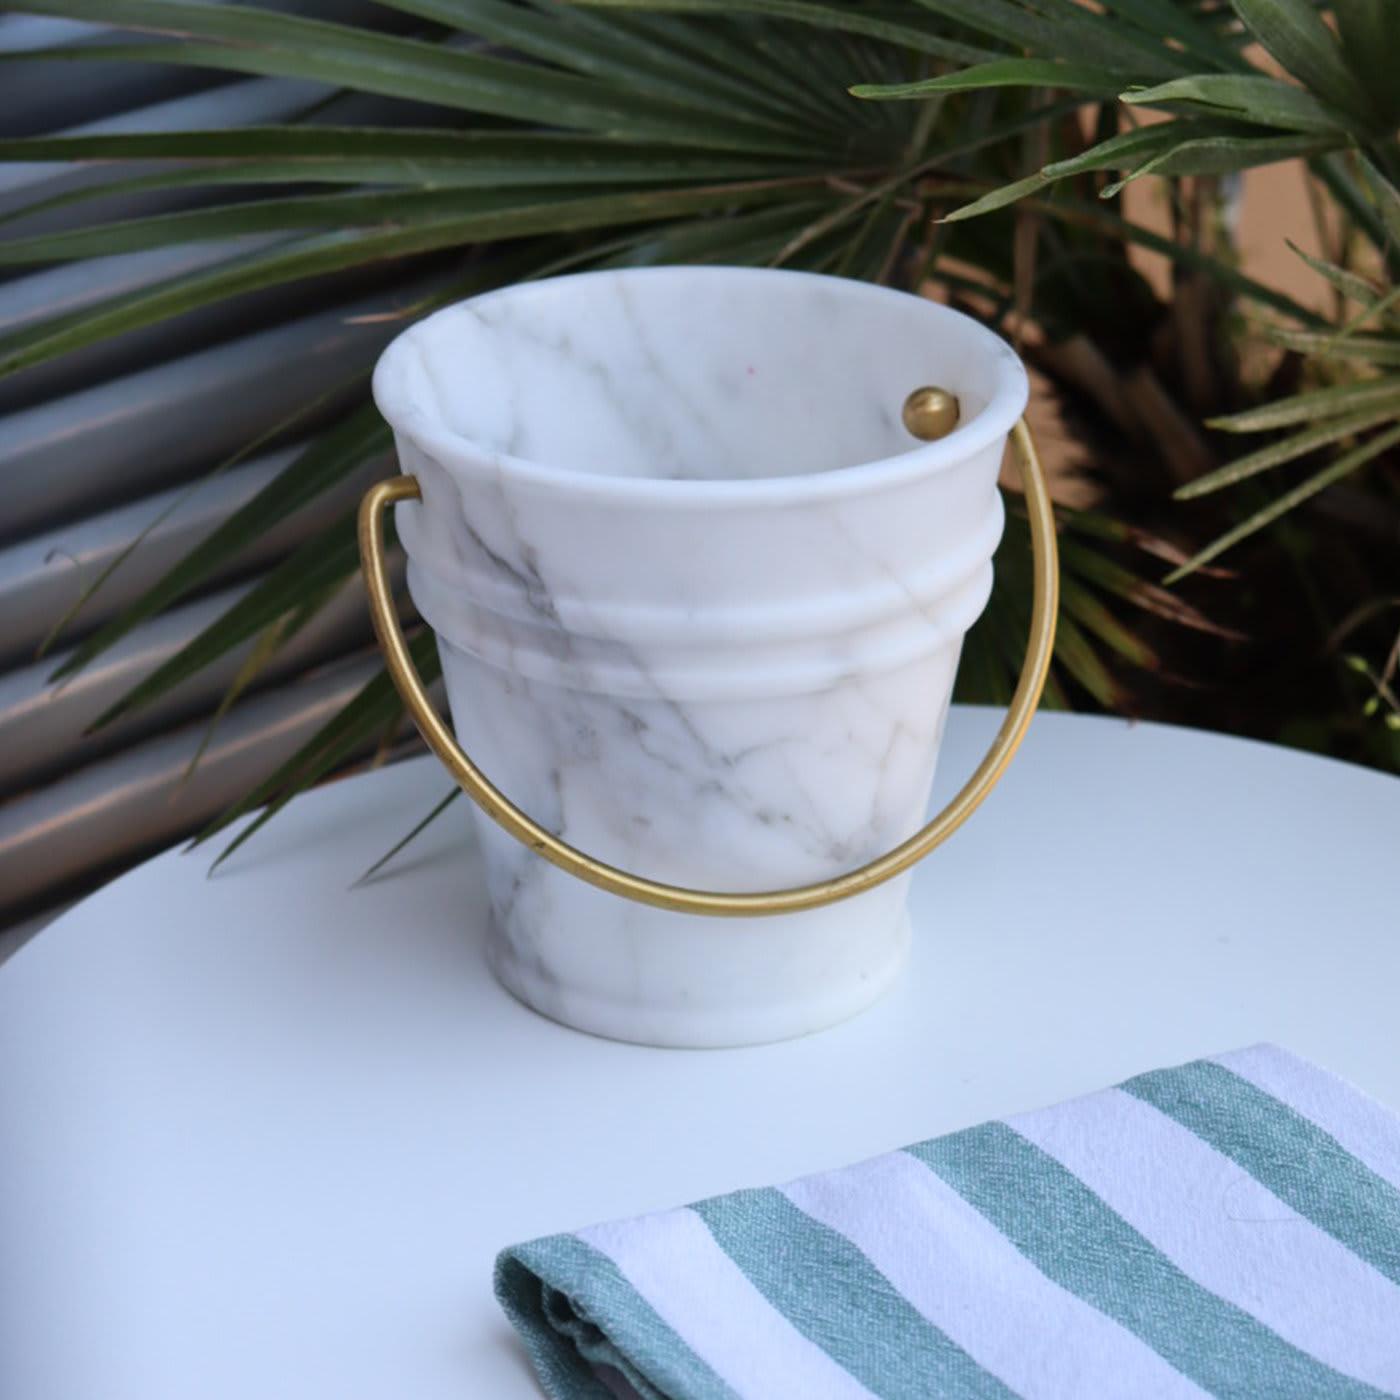 Crafted in Arabescato marble, sourced in Tuscan quarries and entirely handmade by expert craftsmen using traditional methods, this bucket is the modern, more precious version of the iconic zinc bucket. The opaque, majestic surface of the Arabescato